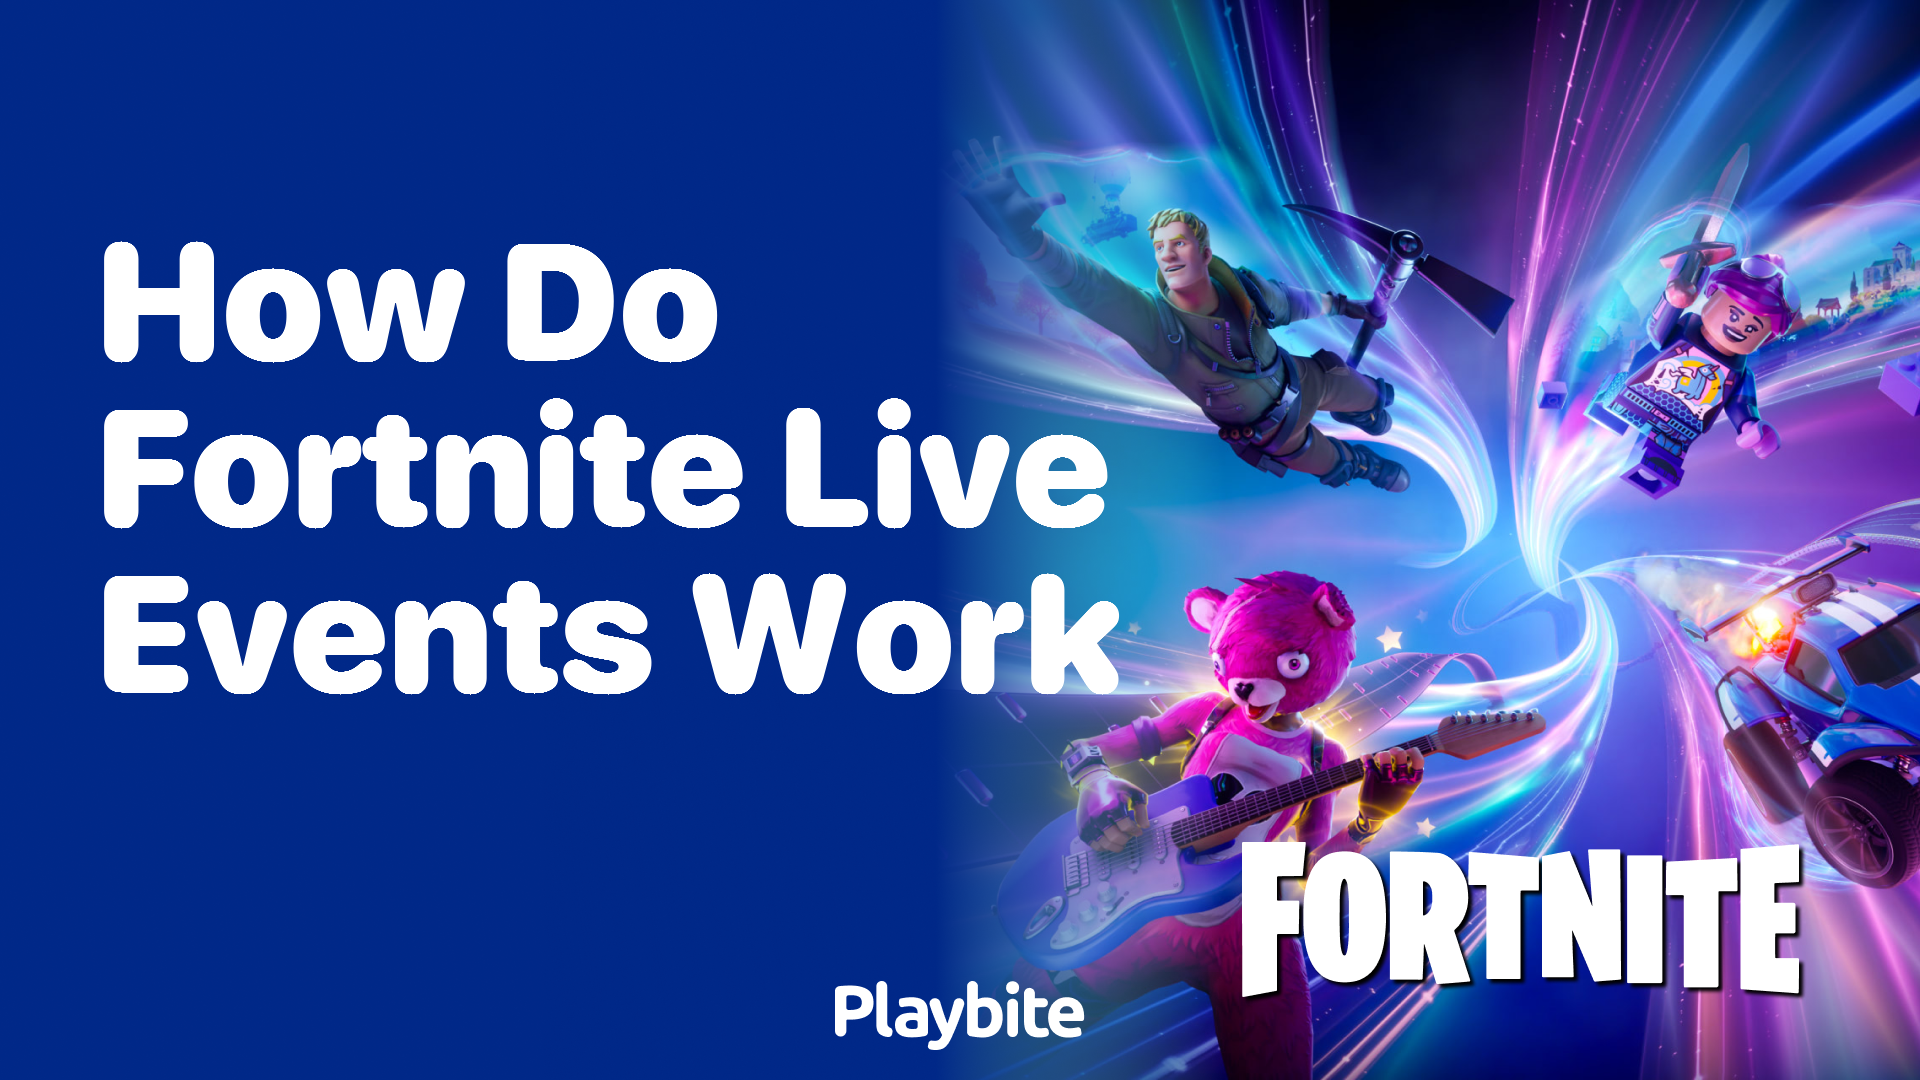 Exciting Fortnite Live Event Moments in the Current Year